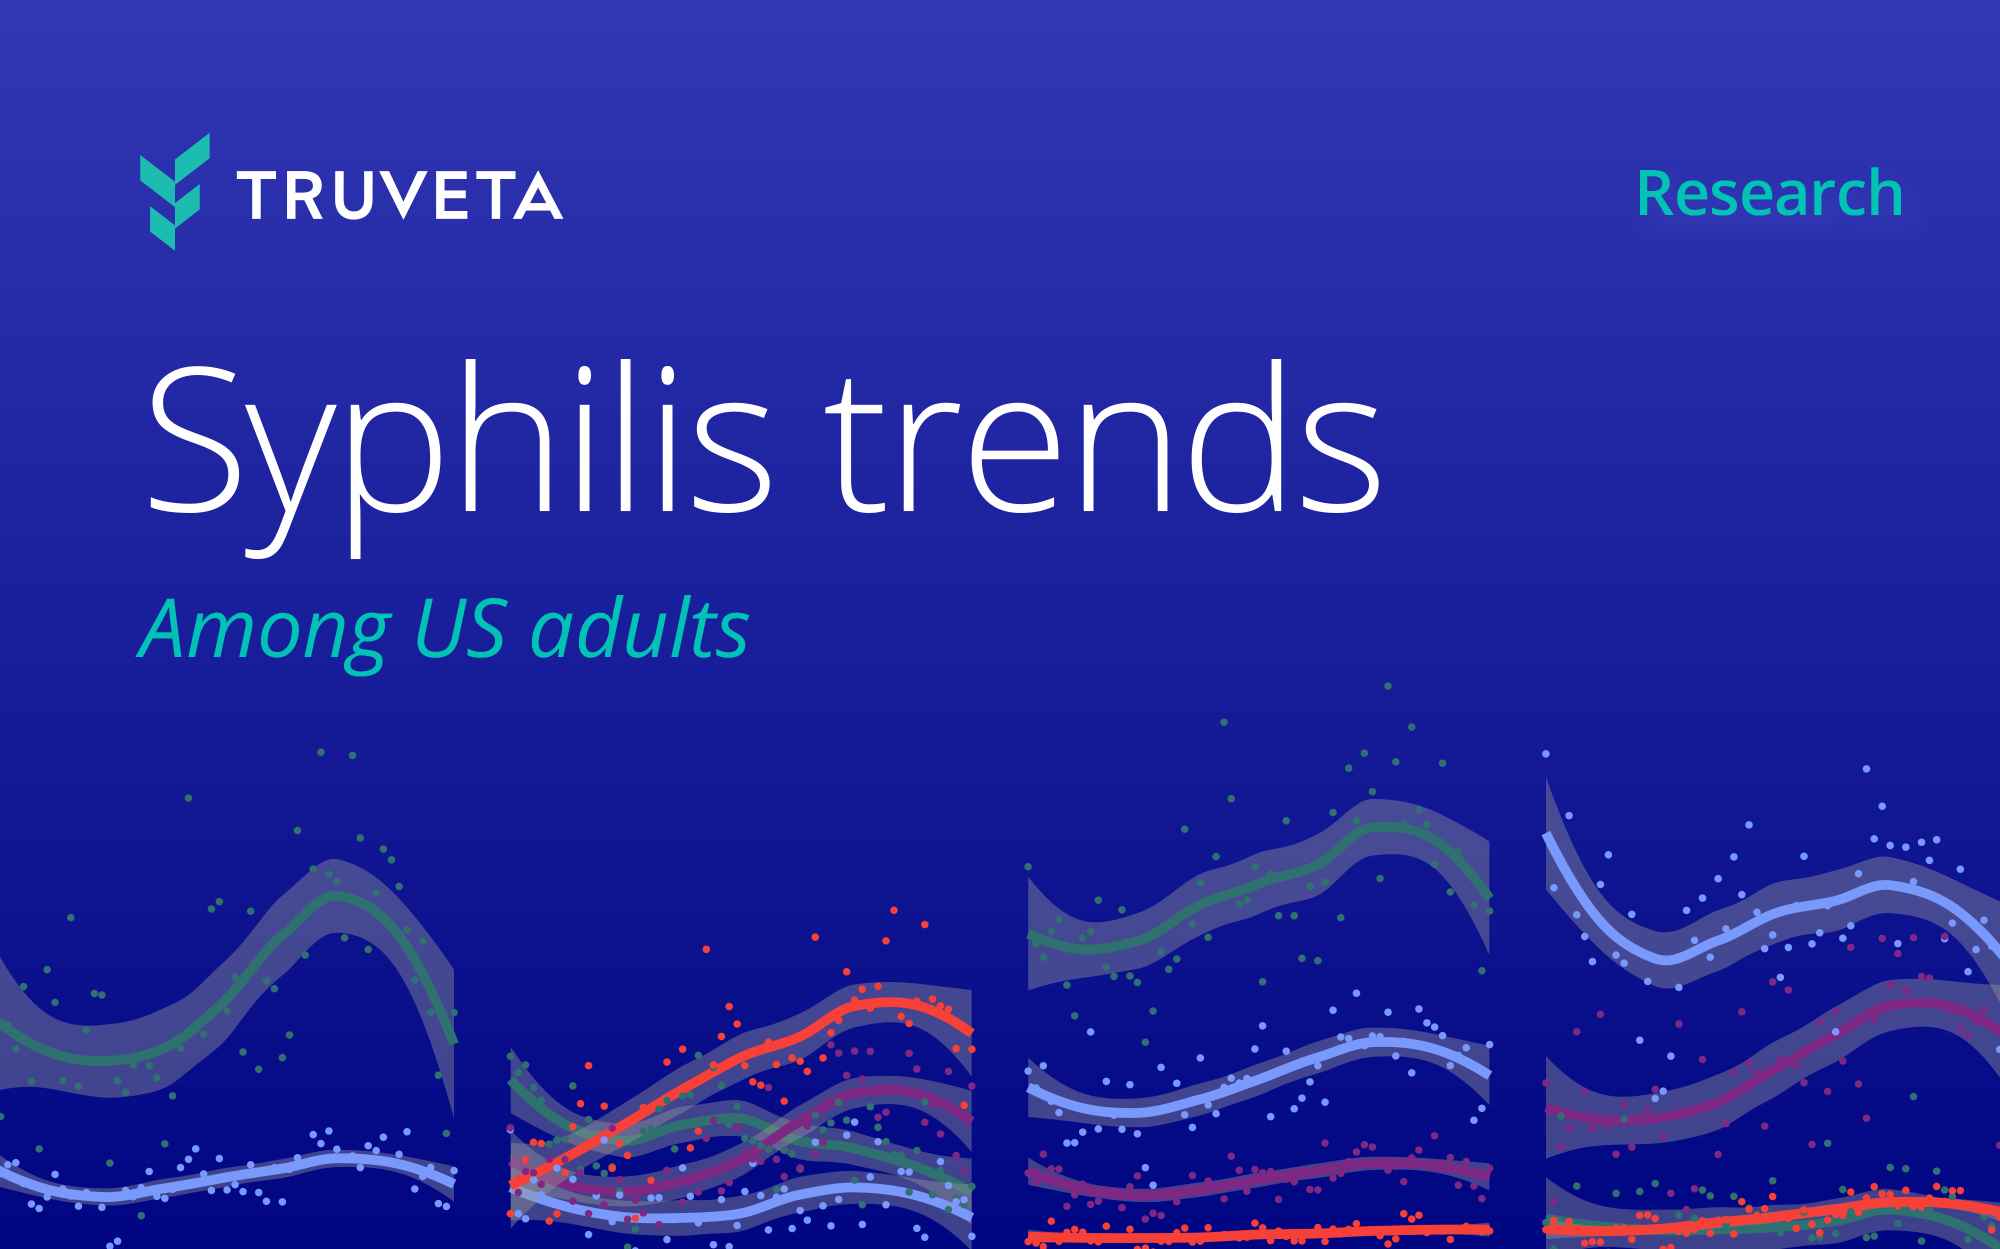 Using timely, de-identified EHR data, Truveta Research explored the monthly trends in the incidence of syphilis among US adults from January 2019 to December 2023.